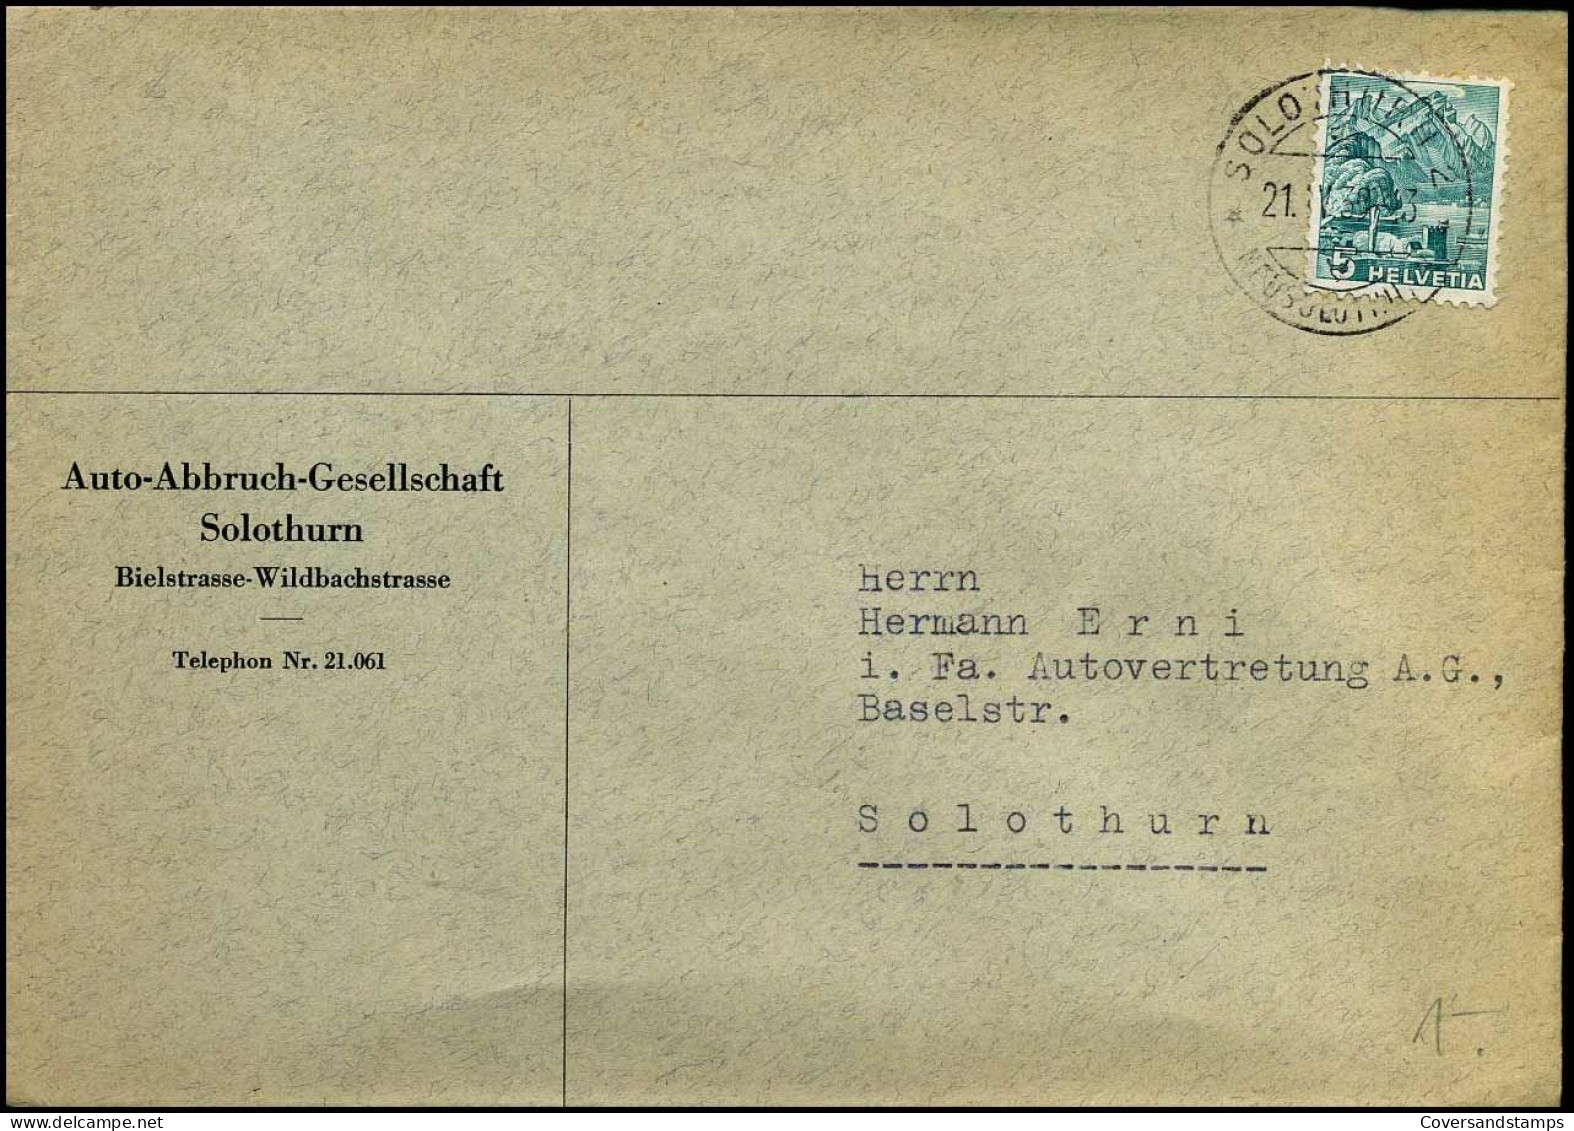 Cover To Solothurn - "Auto-Abbruch-Gesellschaft Solothurn" - Covers & Documents